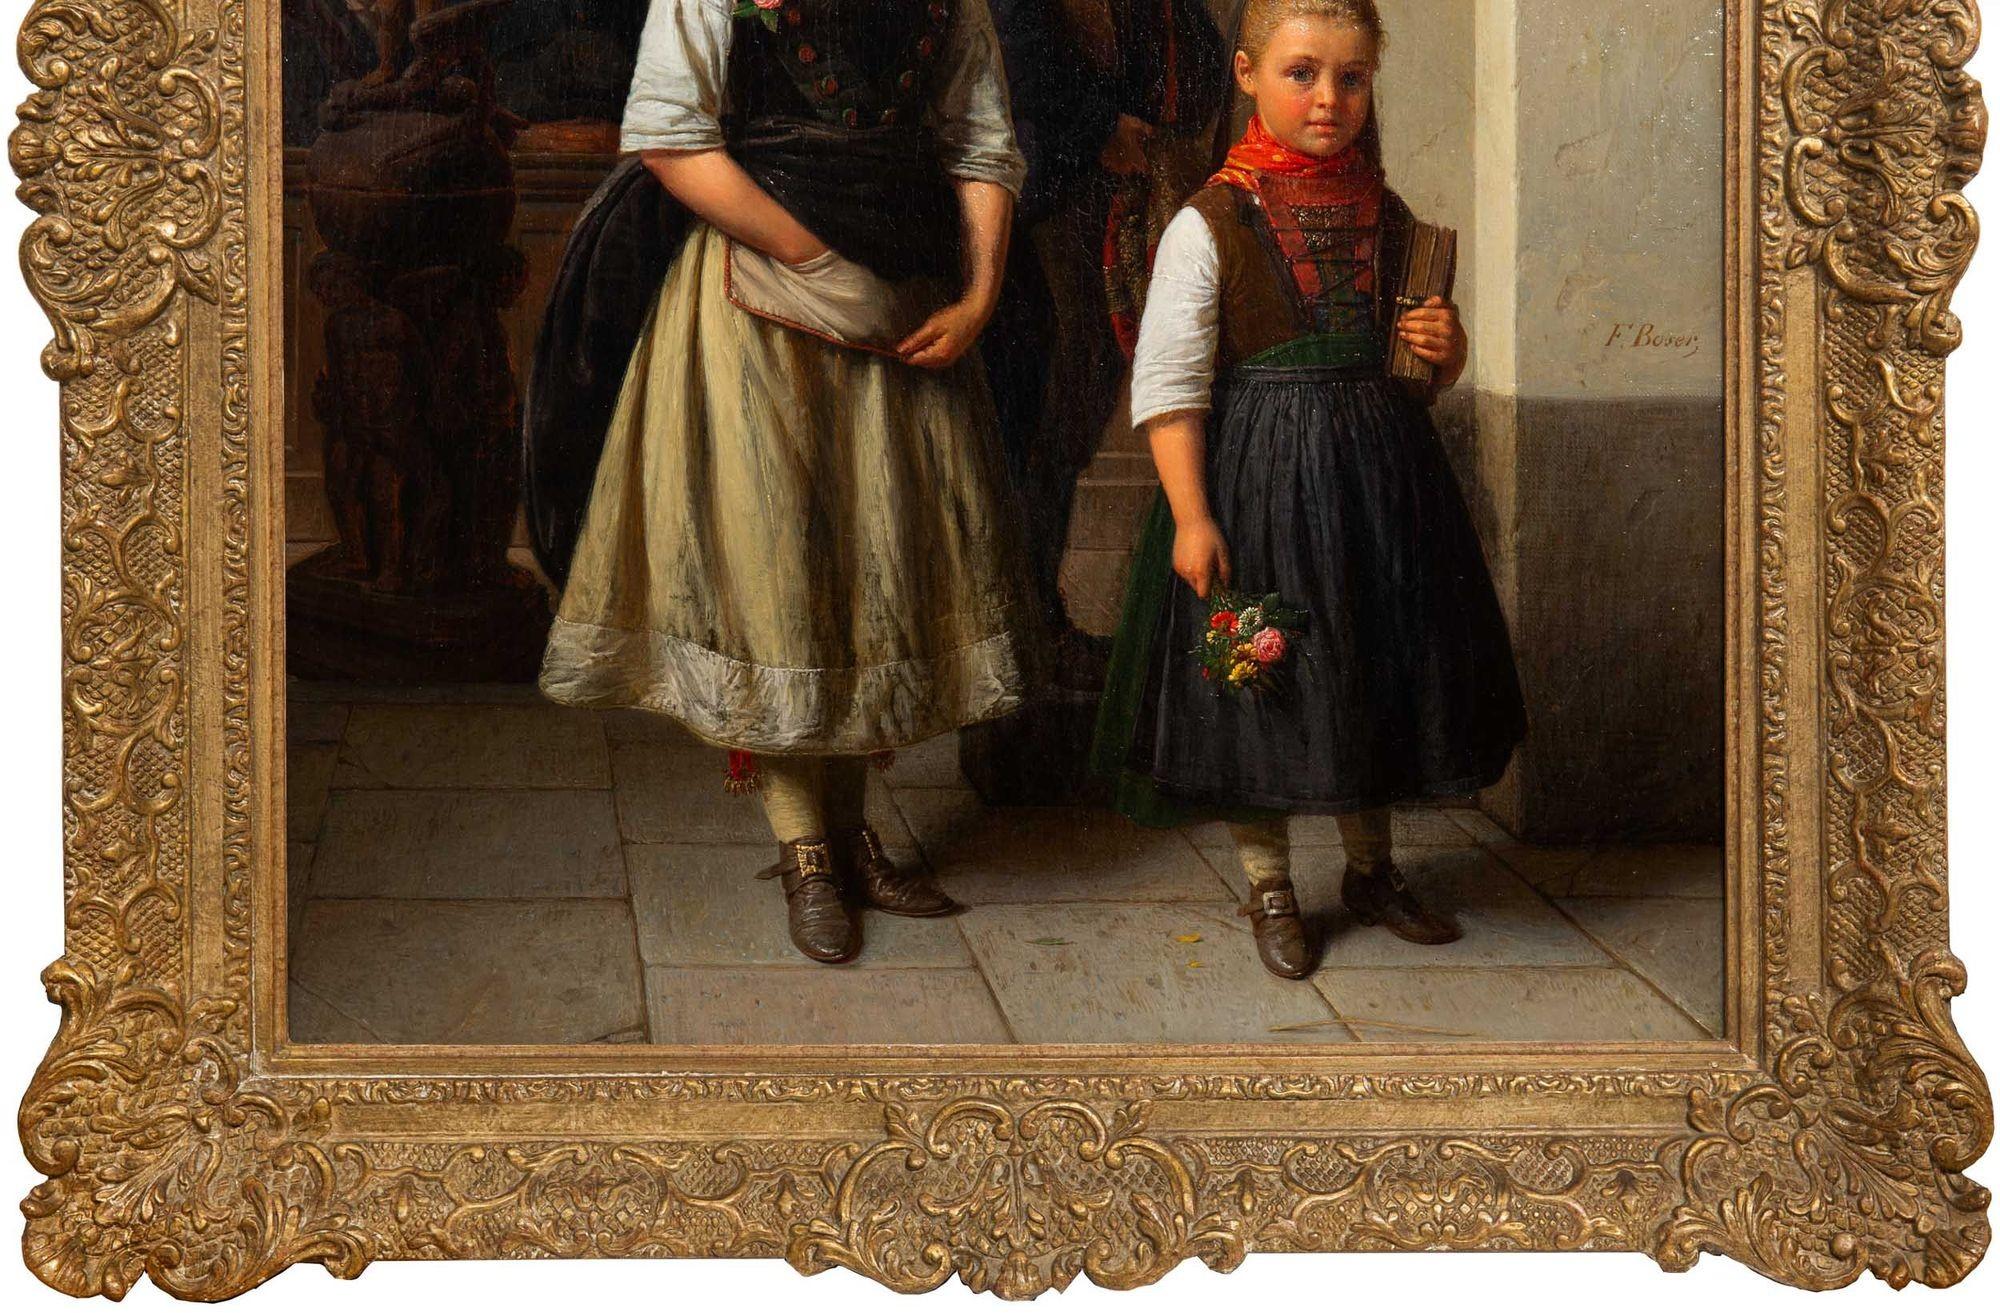 Rare German Romantic Painting of “Siblings After Church” by Karl Boser ca. 1860 For Sale 6